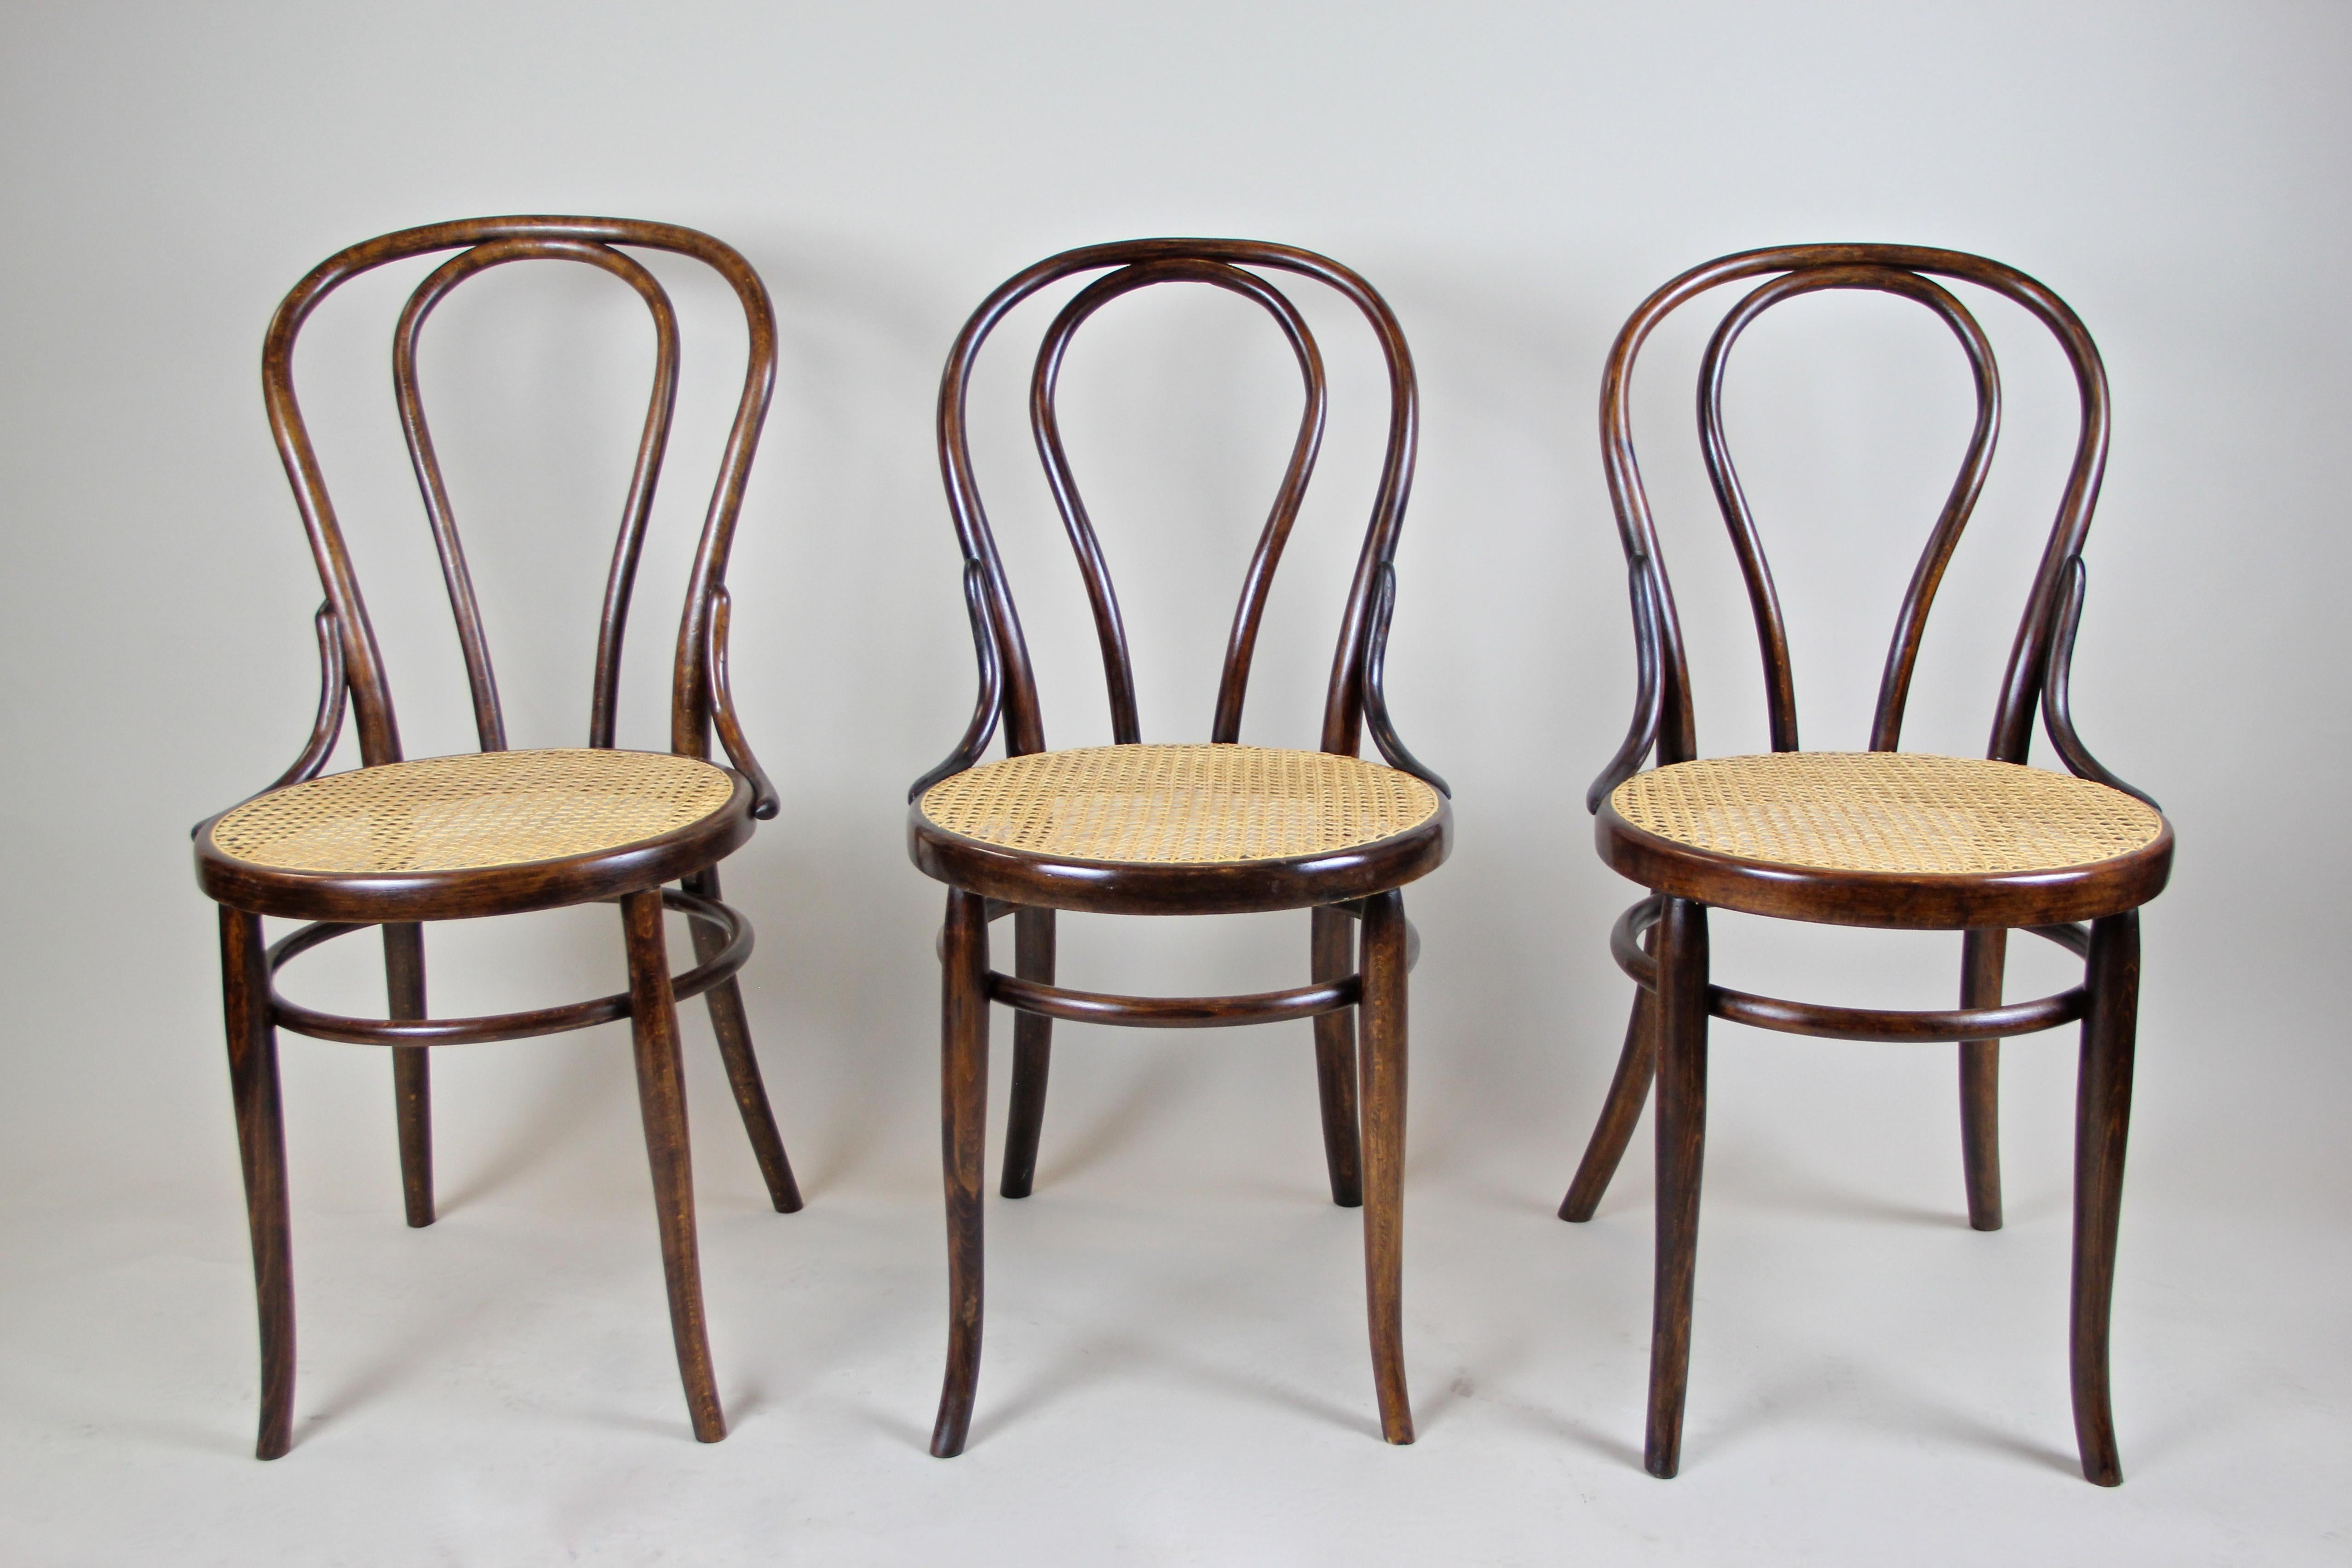 Elegant set of five bentwood chairs made by the renown company of Fischel in Vienna Austria, circa 1910. These beautiful Art Nouveau chairs show a very similar design like the famous Thonet coffeehouse chairs No. 14. Made of bent beechwood and toned